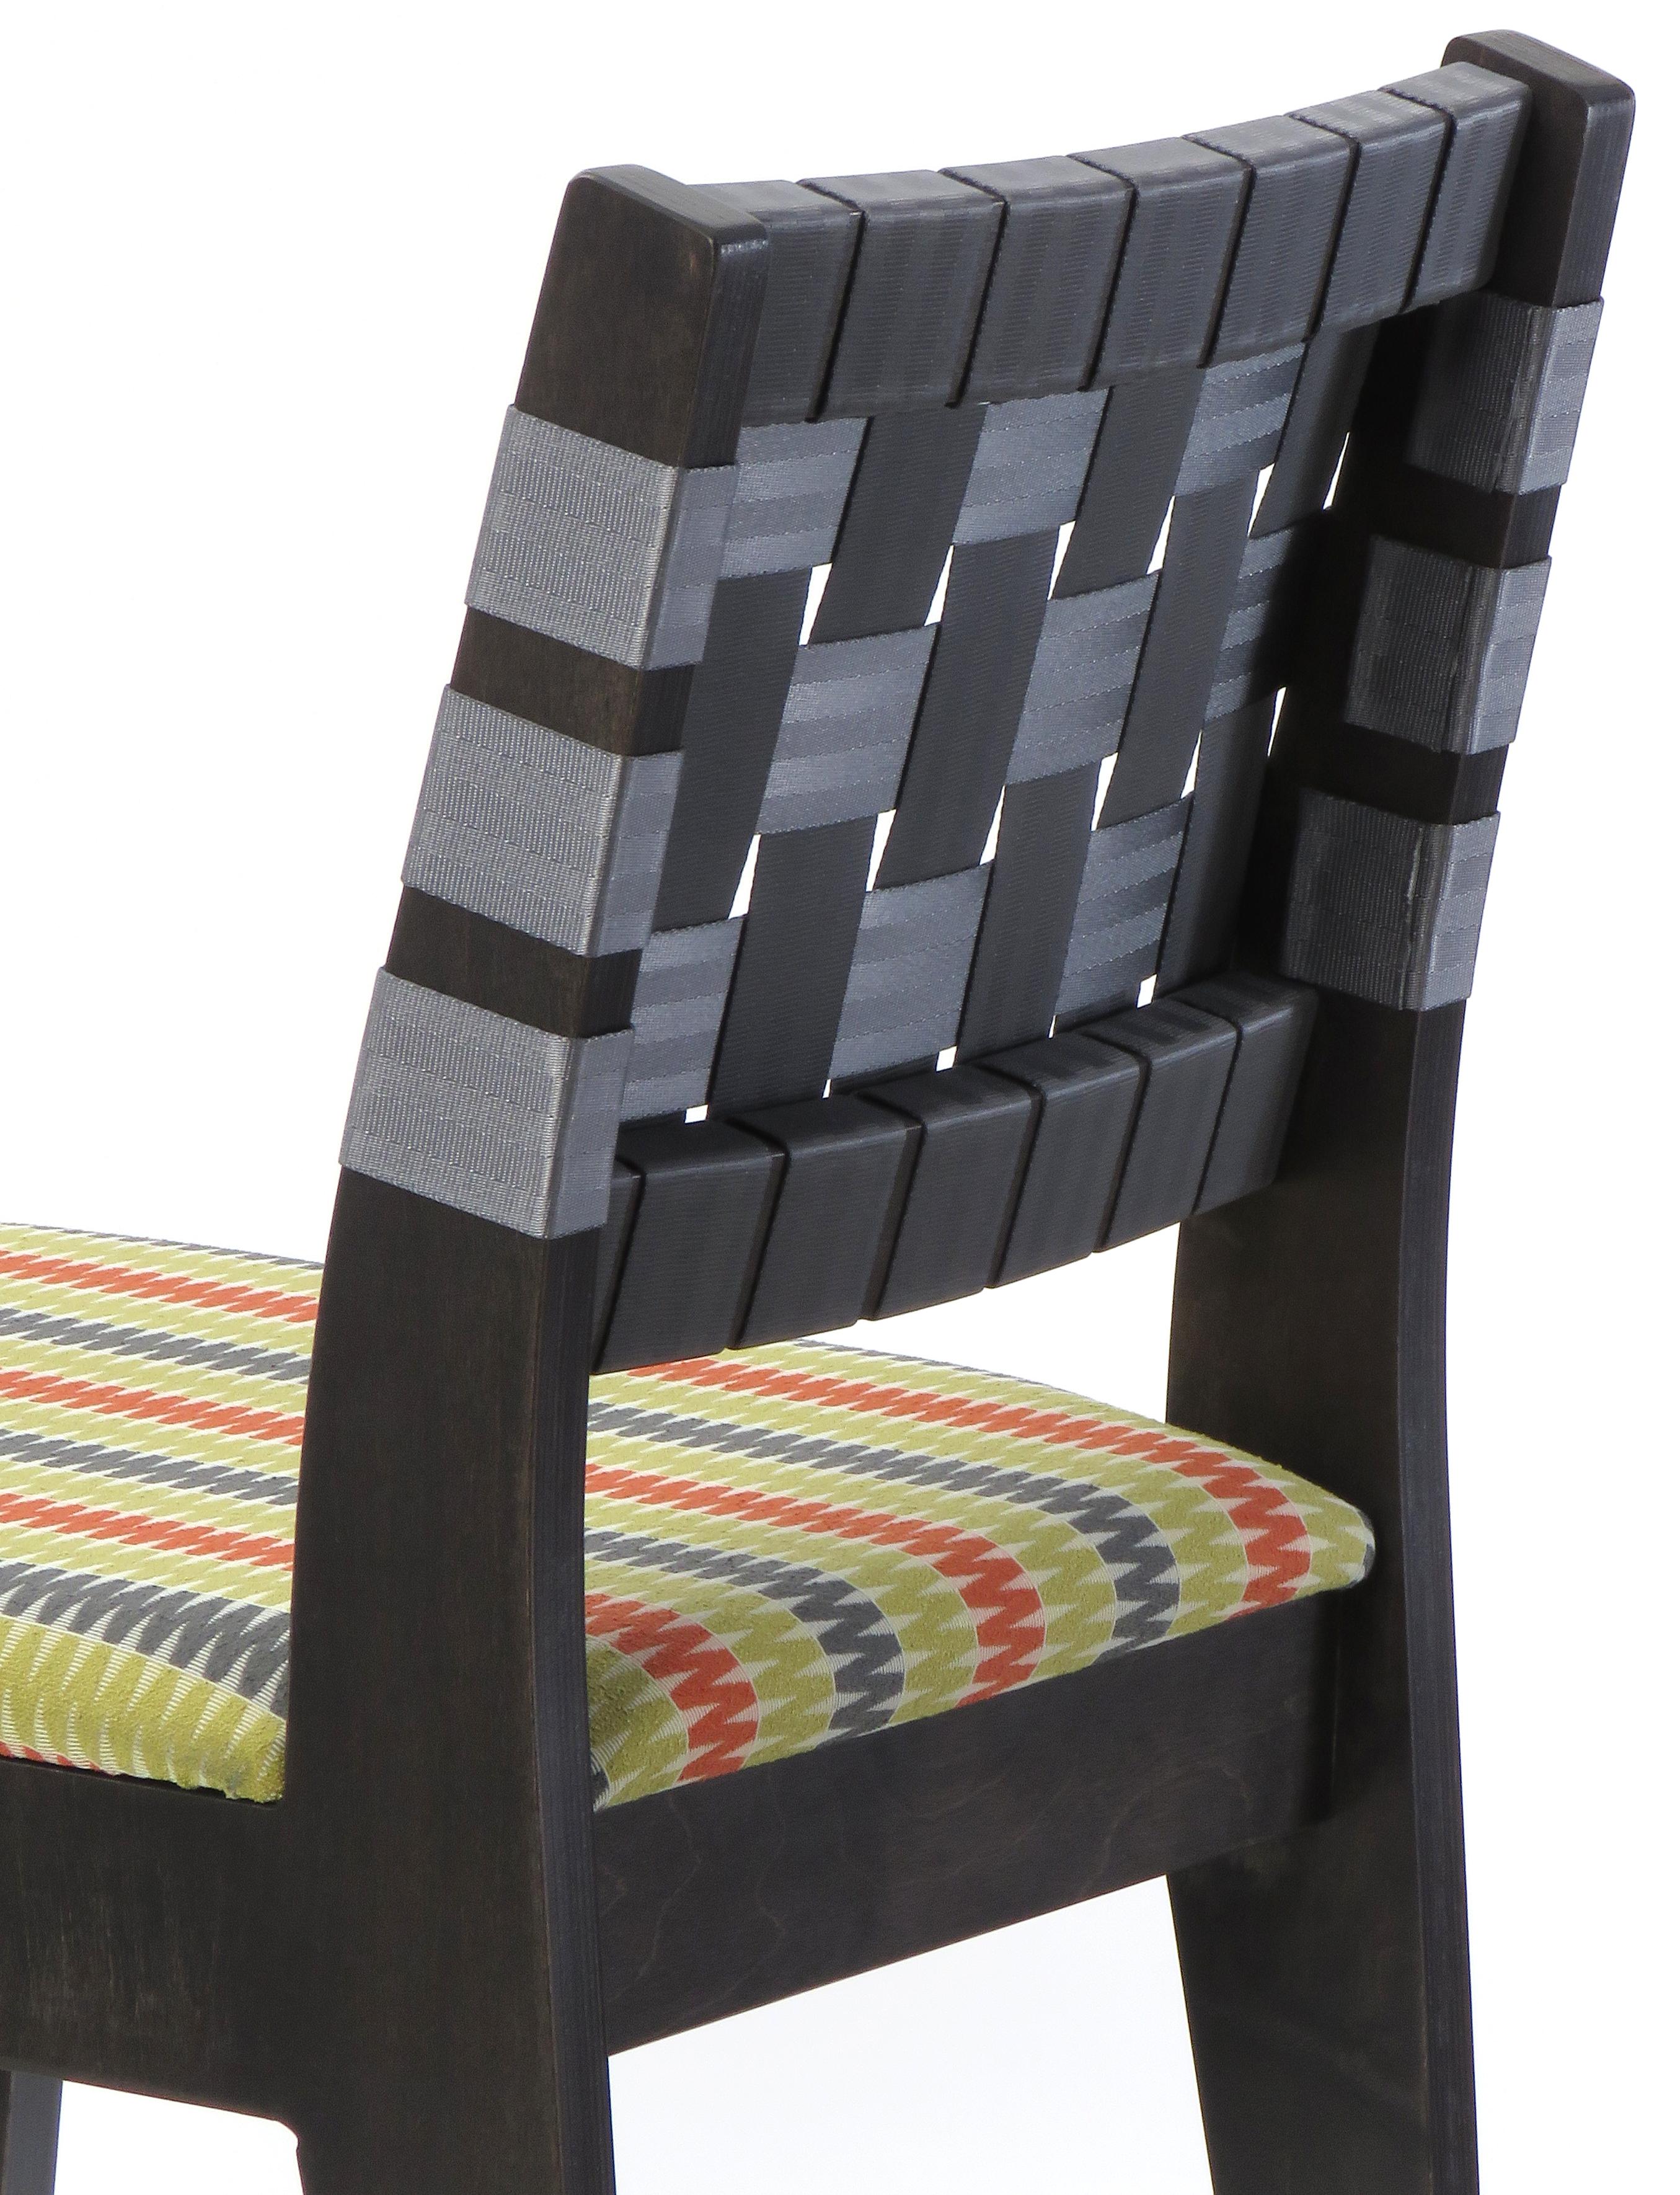 Birch Maple Side Chair in Black Finish with Red Woven Seat and Back by Peter Danko For Sale